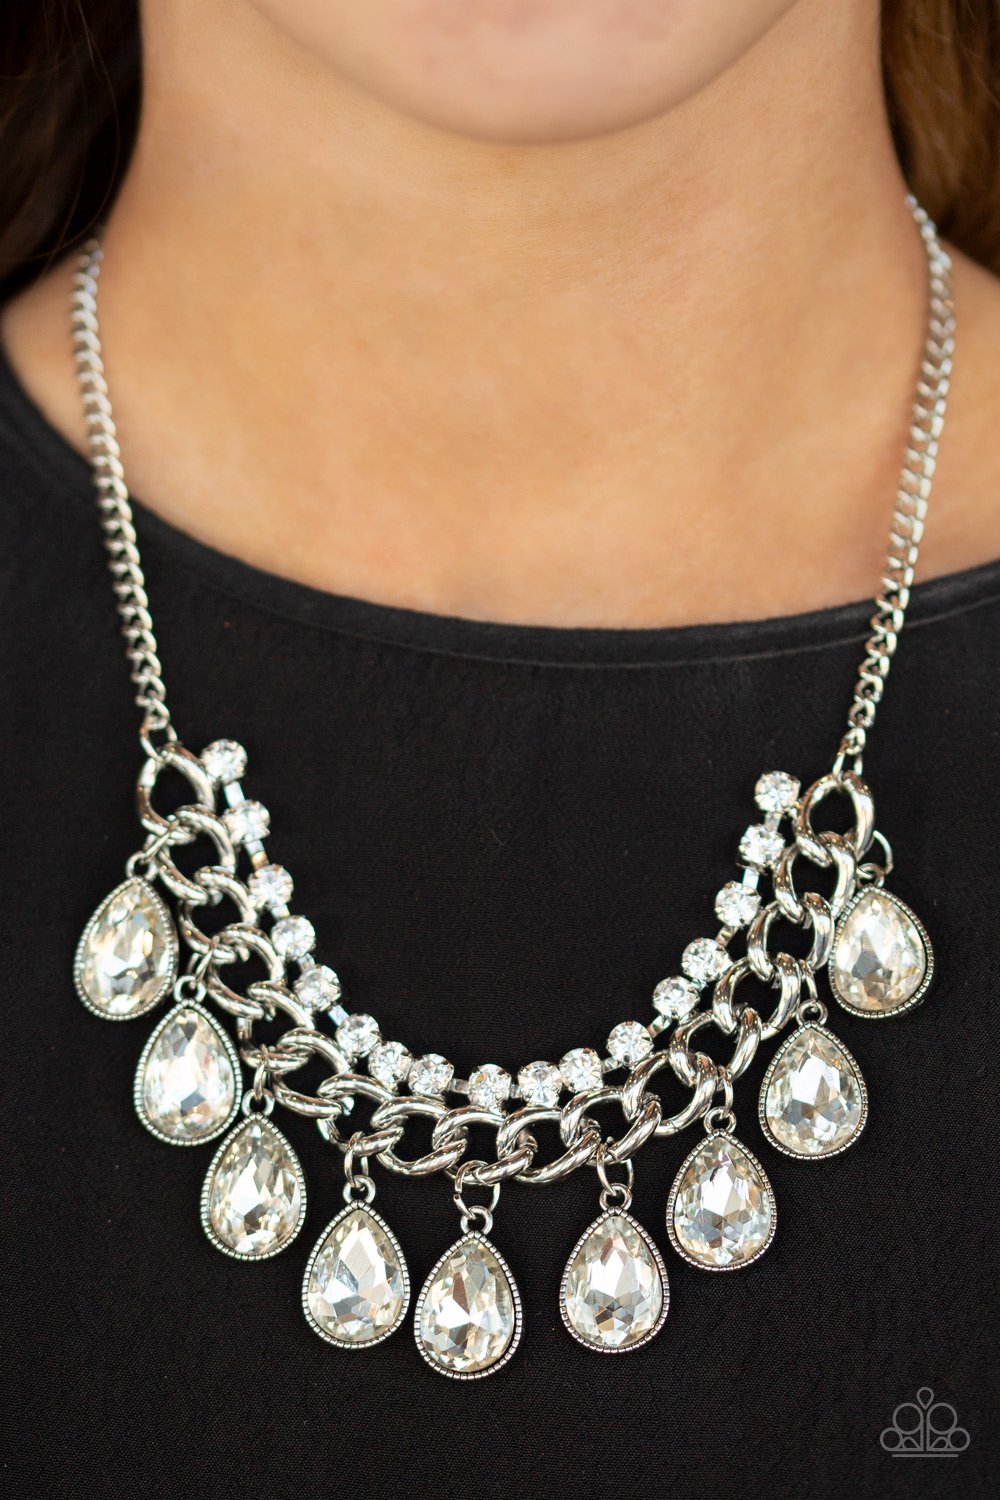 All Toget-HEIR Now-white-Paparazzi necklace